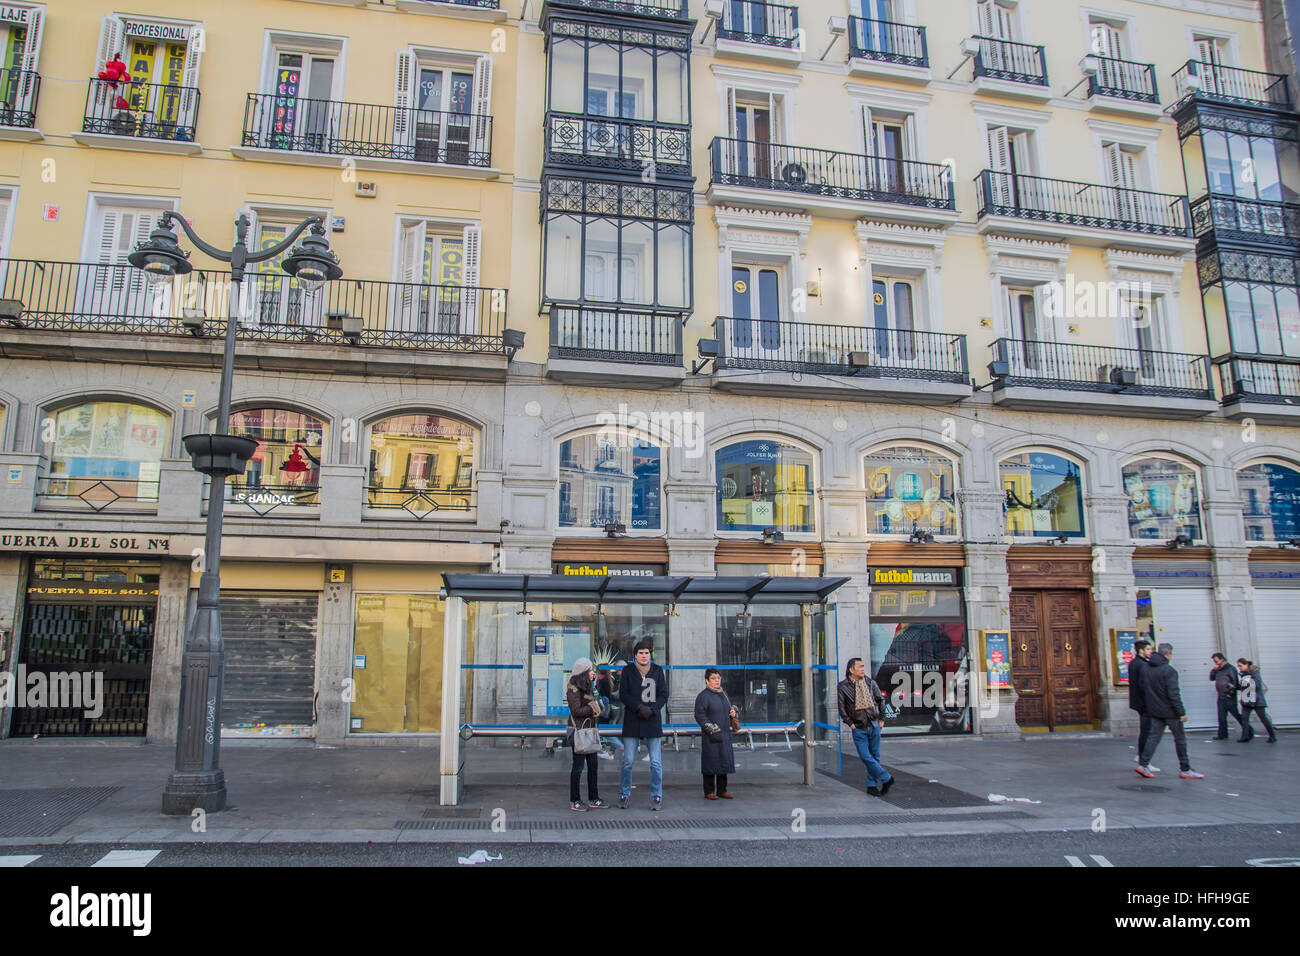 Madrid, Spain. 1st January 2017. Madrid, January 1th 2017. First day of 2017 on the streets in Madrid, Spain. In the picture few people in square puerta del sol waiting for a bus. Credit: Alberto Sibaja Ramírez/Alamy Live News Stock Photo